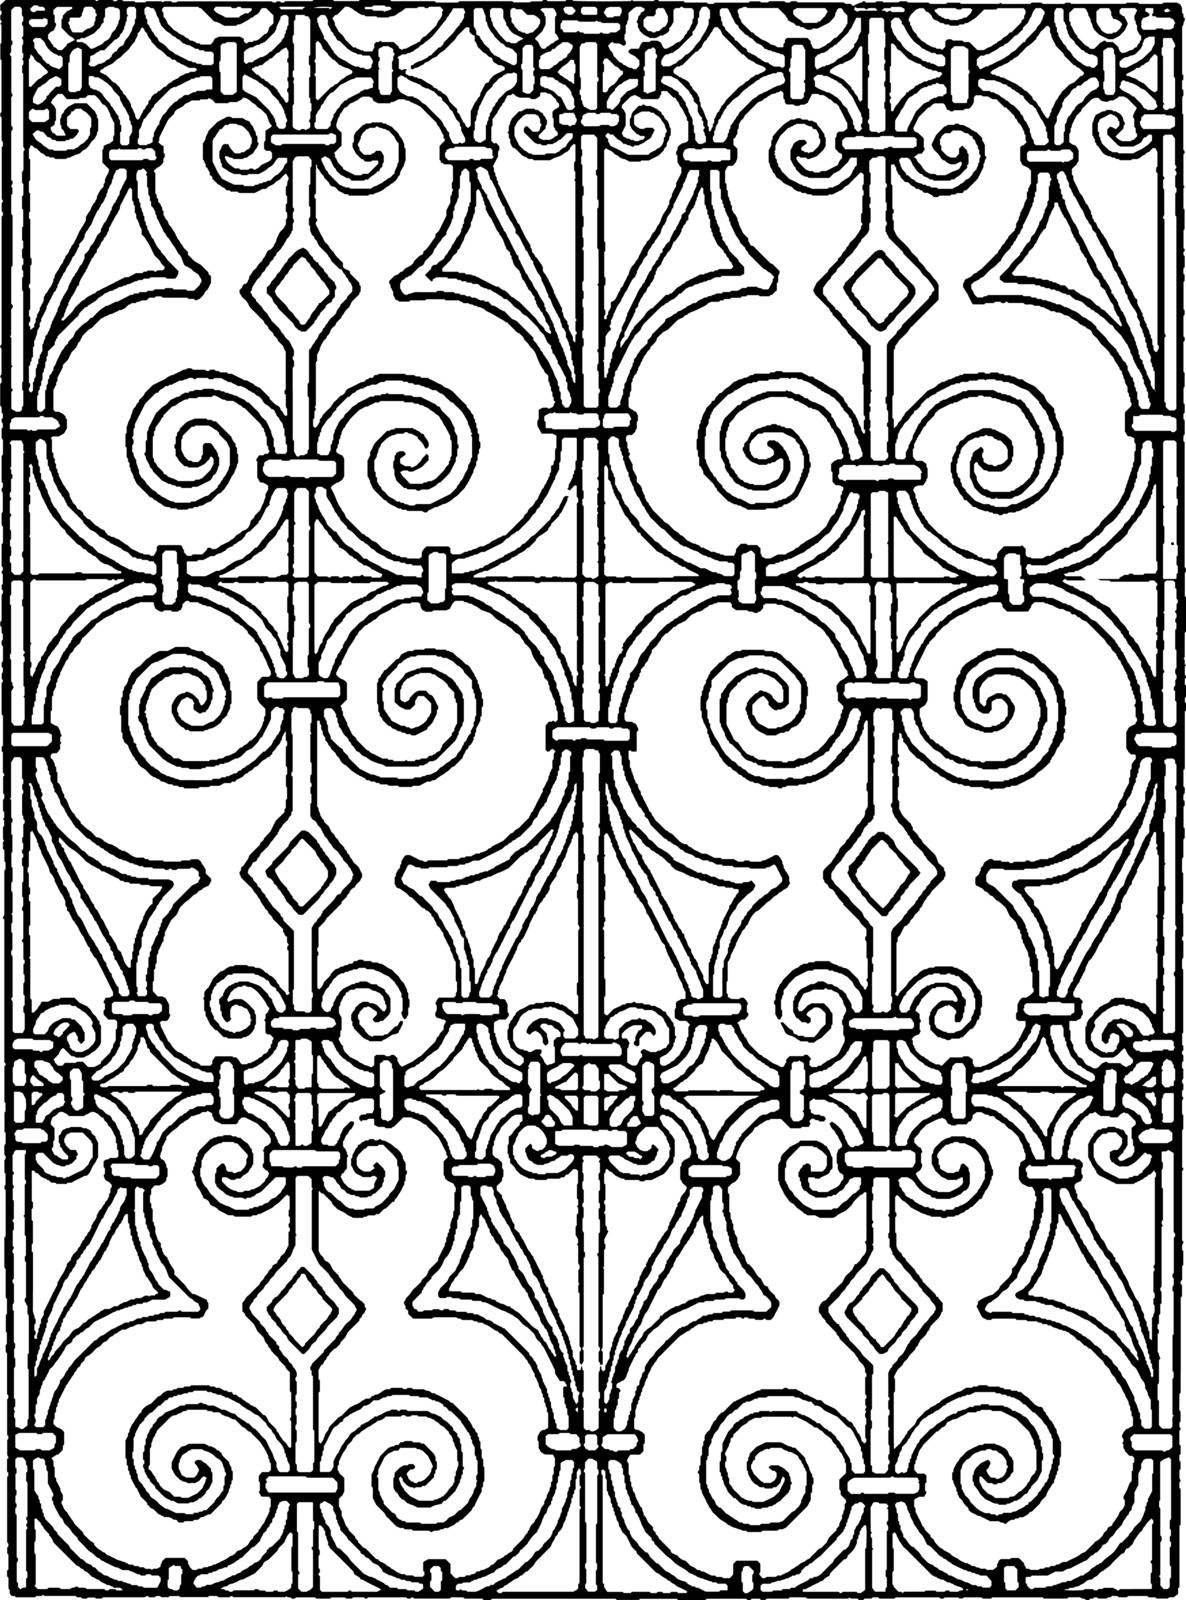 Italian Renaissance Pattern  is a repeating scroll-like ornament between parallel bars  and it is the pattern of the period beginning in the late 13th century, vintage line drawing or engraving illustration.